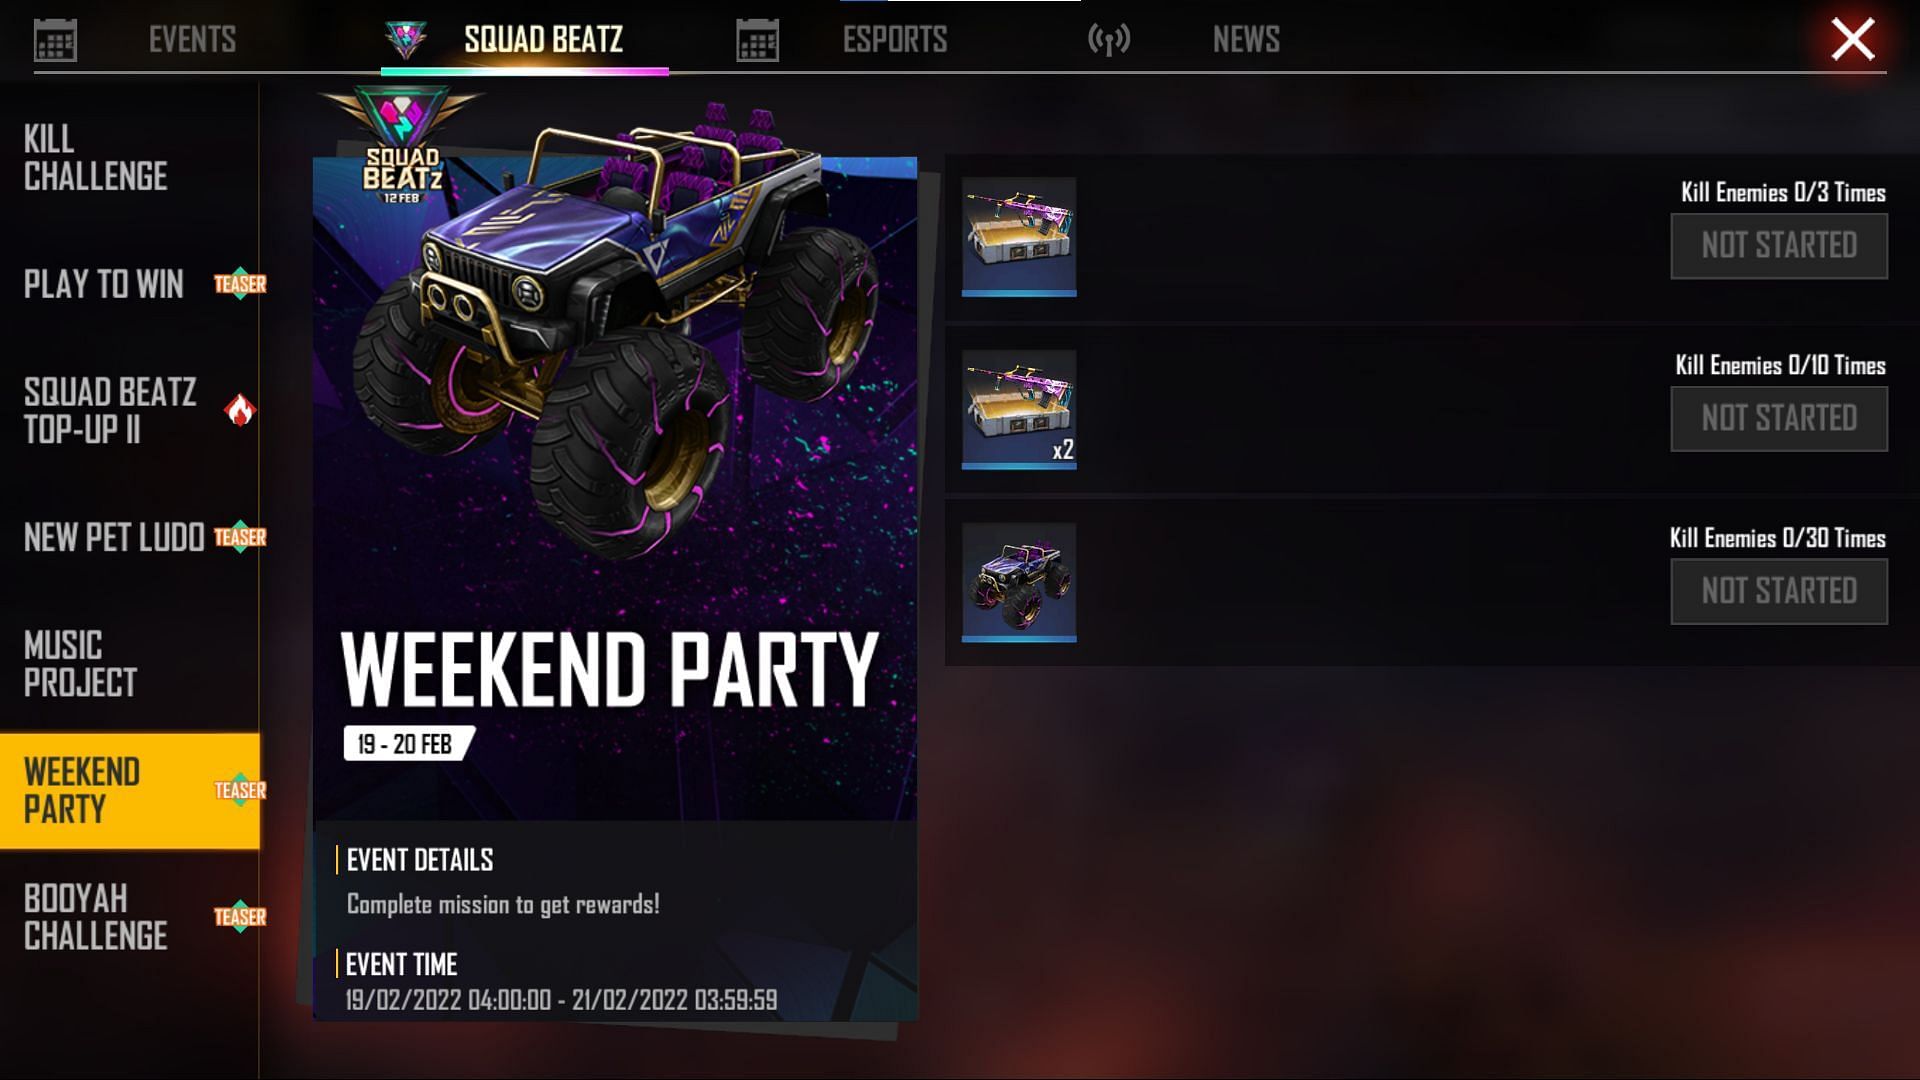 The missions for the Weekend Party (Image via Garena)